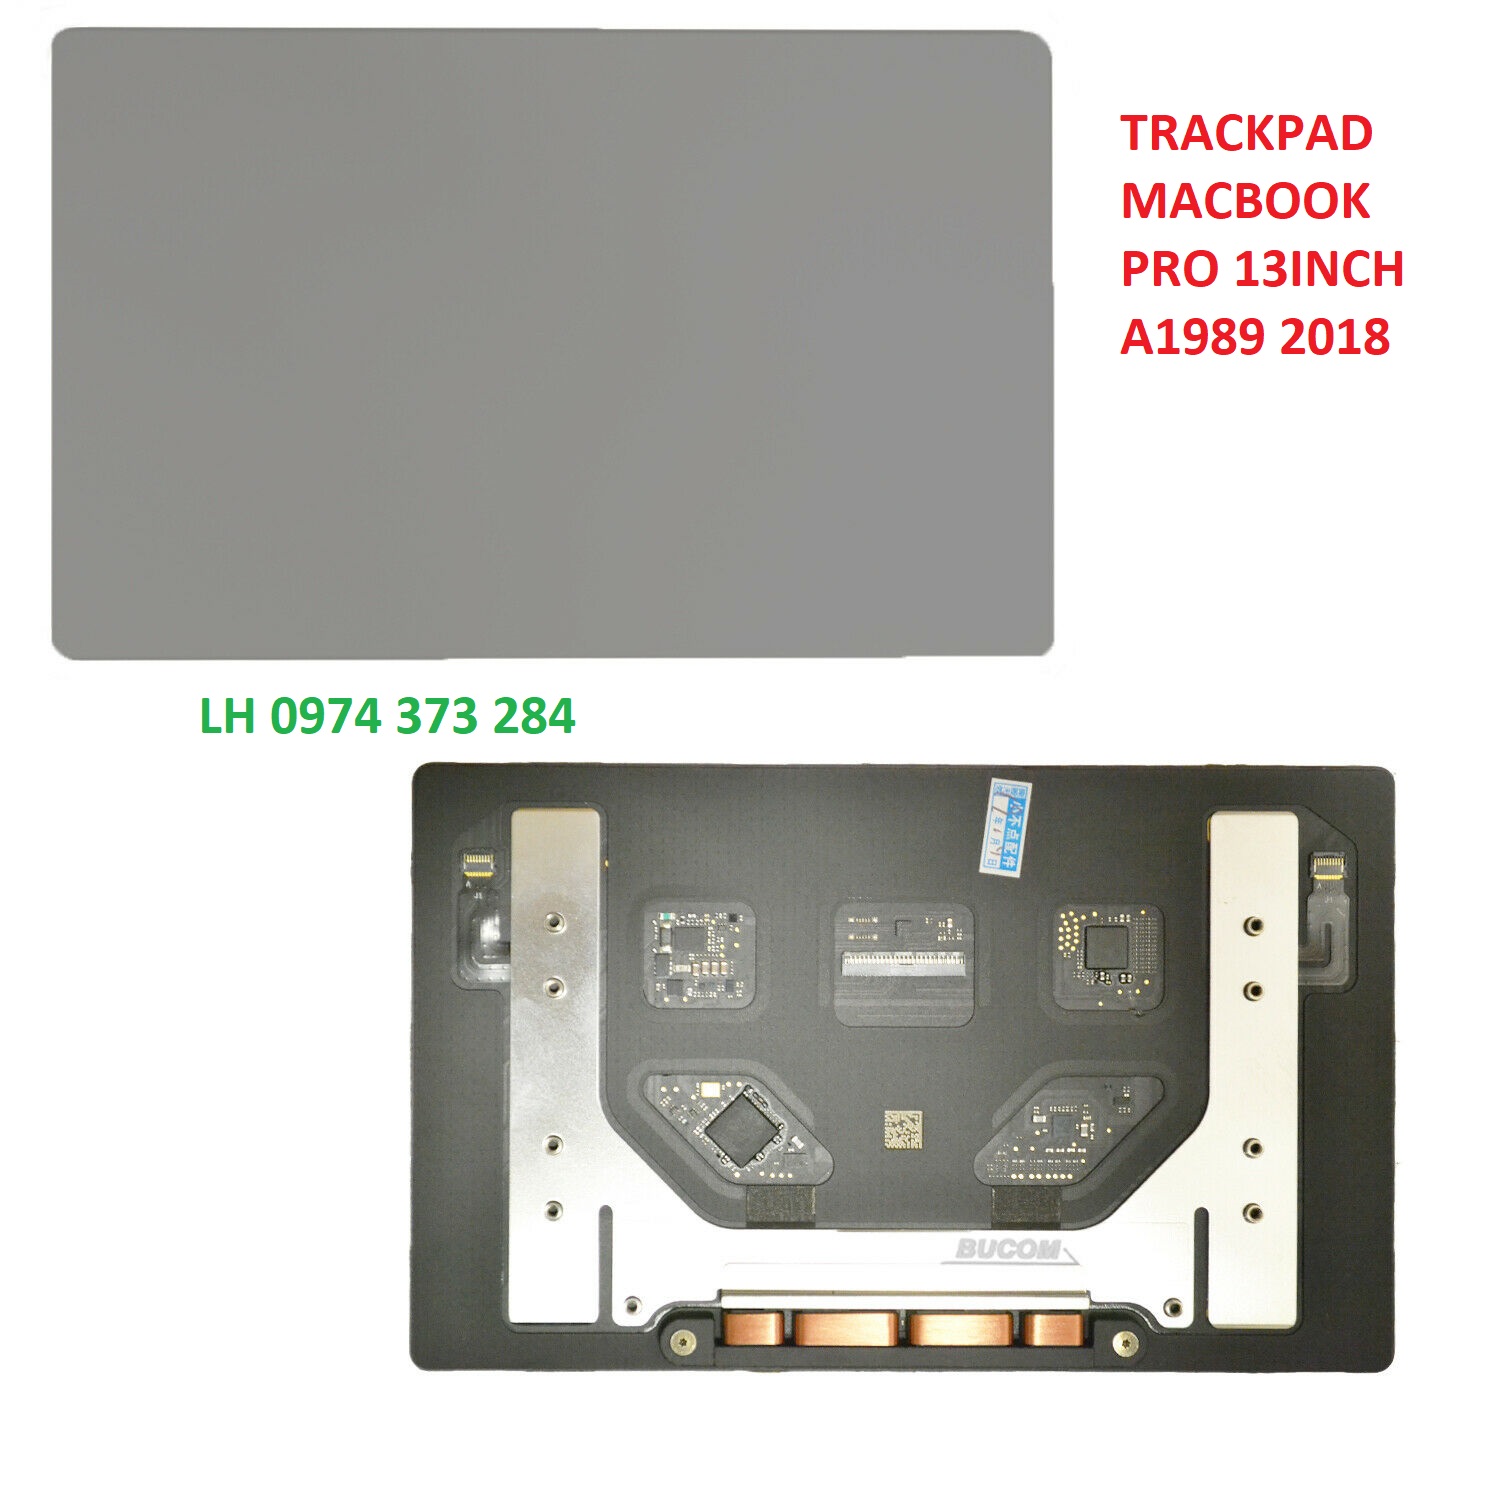 CHUỘT TRACKPAD FORCE TOUCHPAD MACBOOK PRO 13INCH a1989 2018